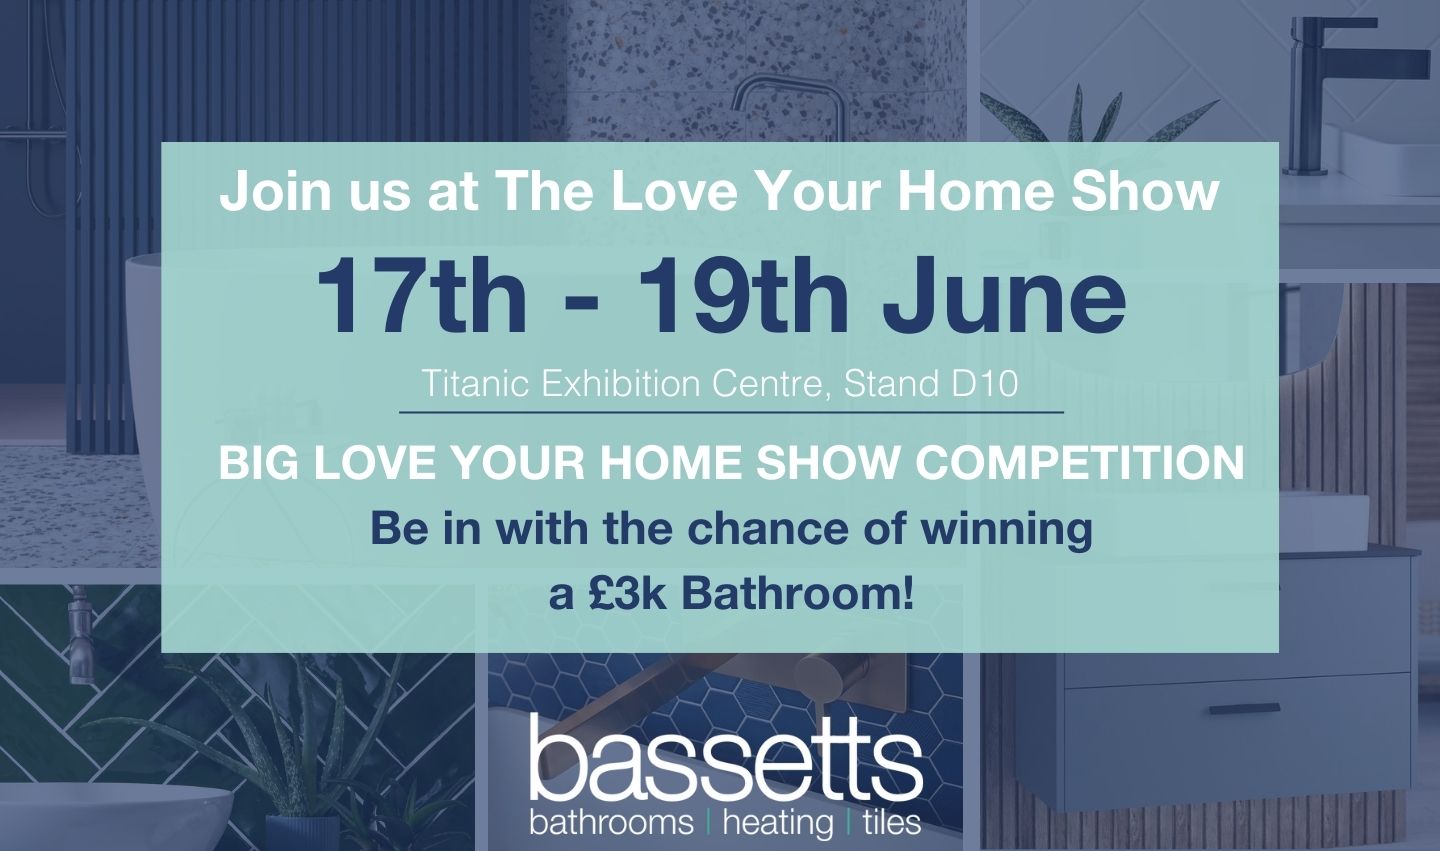 The BIG LOVE YOUR HOME SHOW COMPETITION